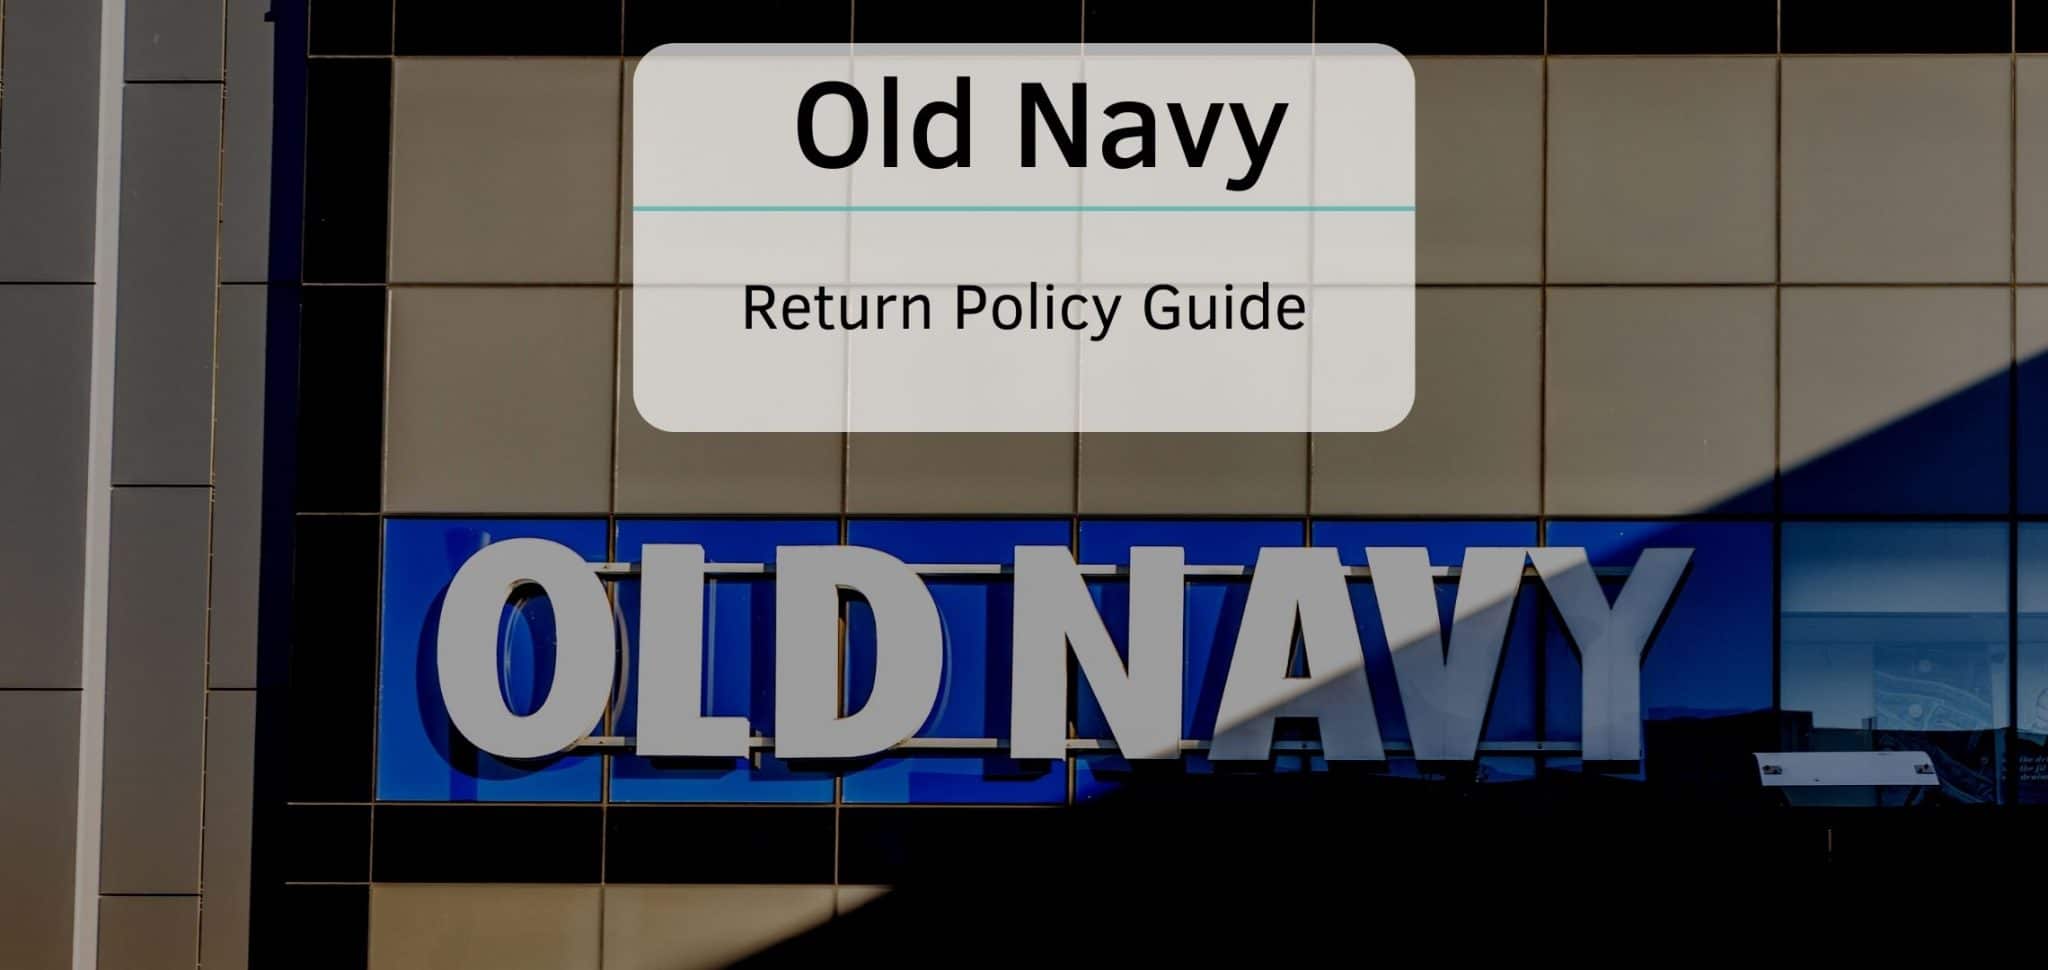 Old Navy Return Policy Guide